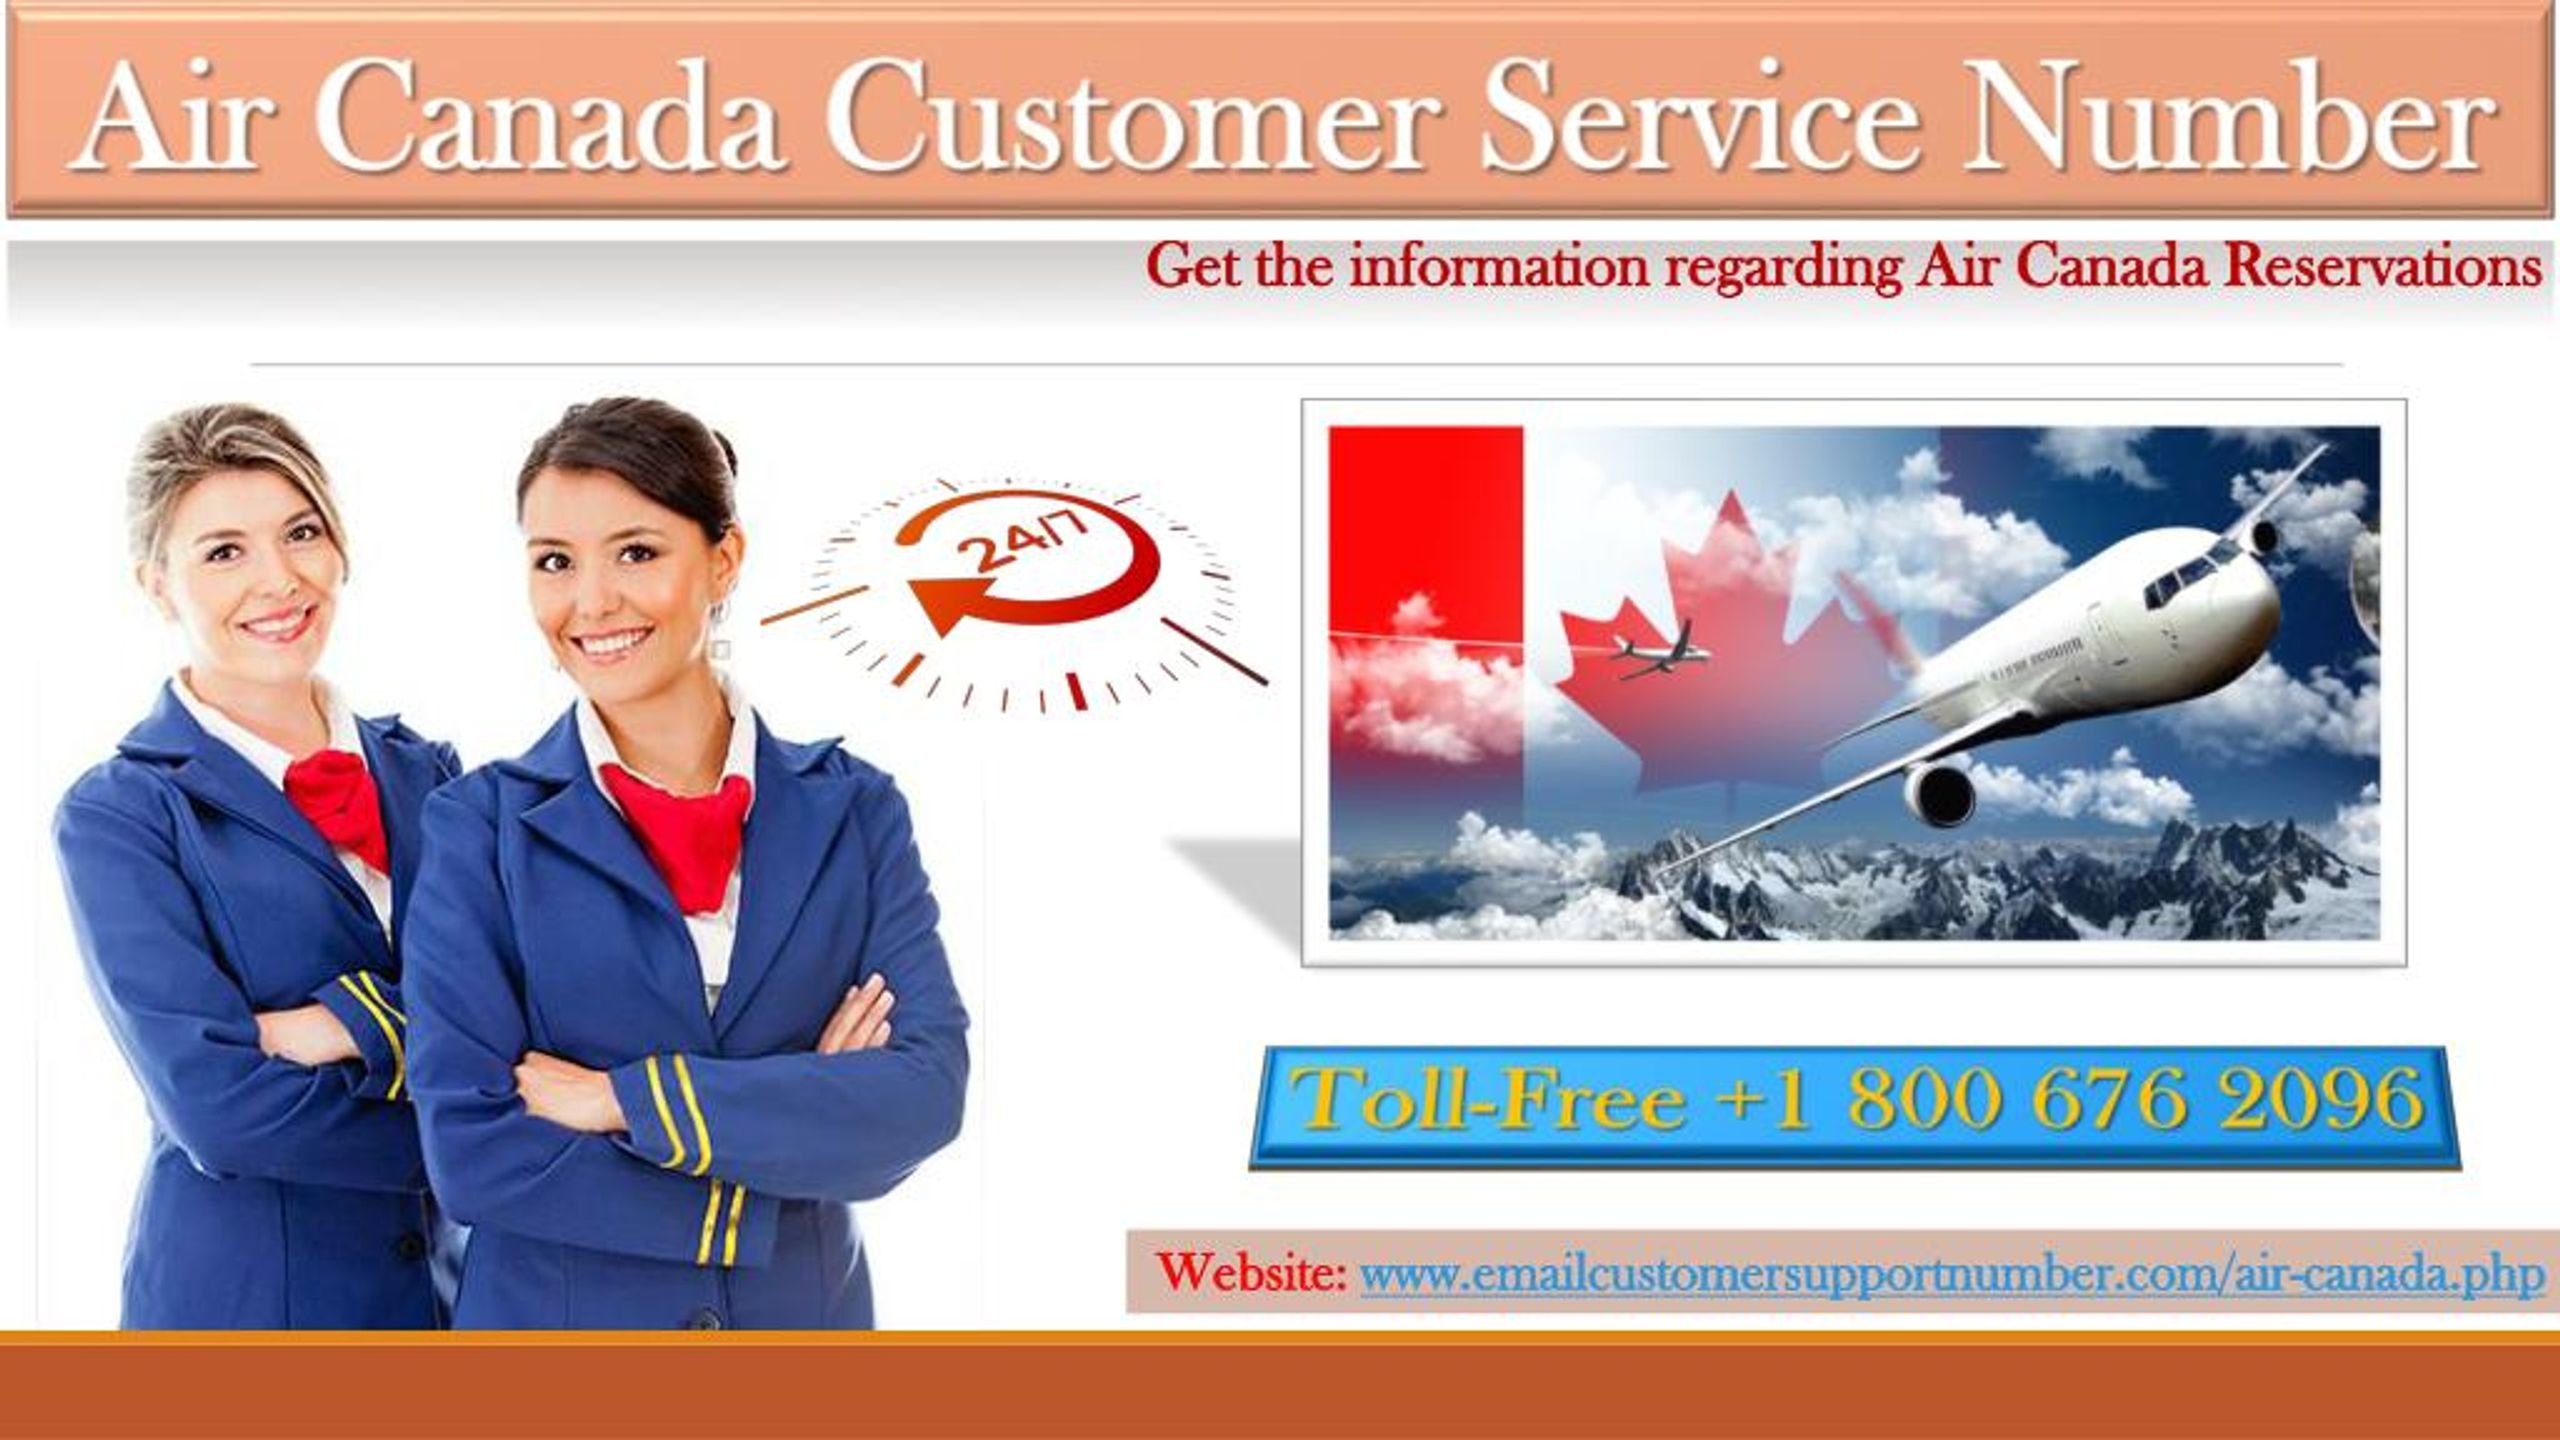 Ppt The Air Canada Customer Service Provide The Better Service